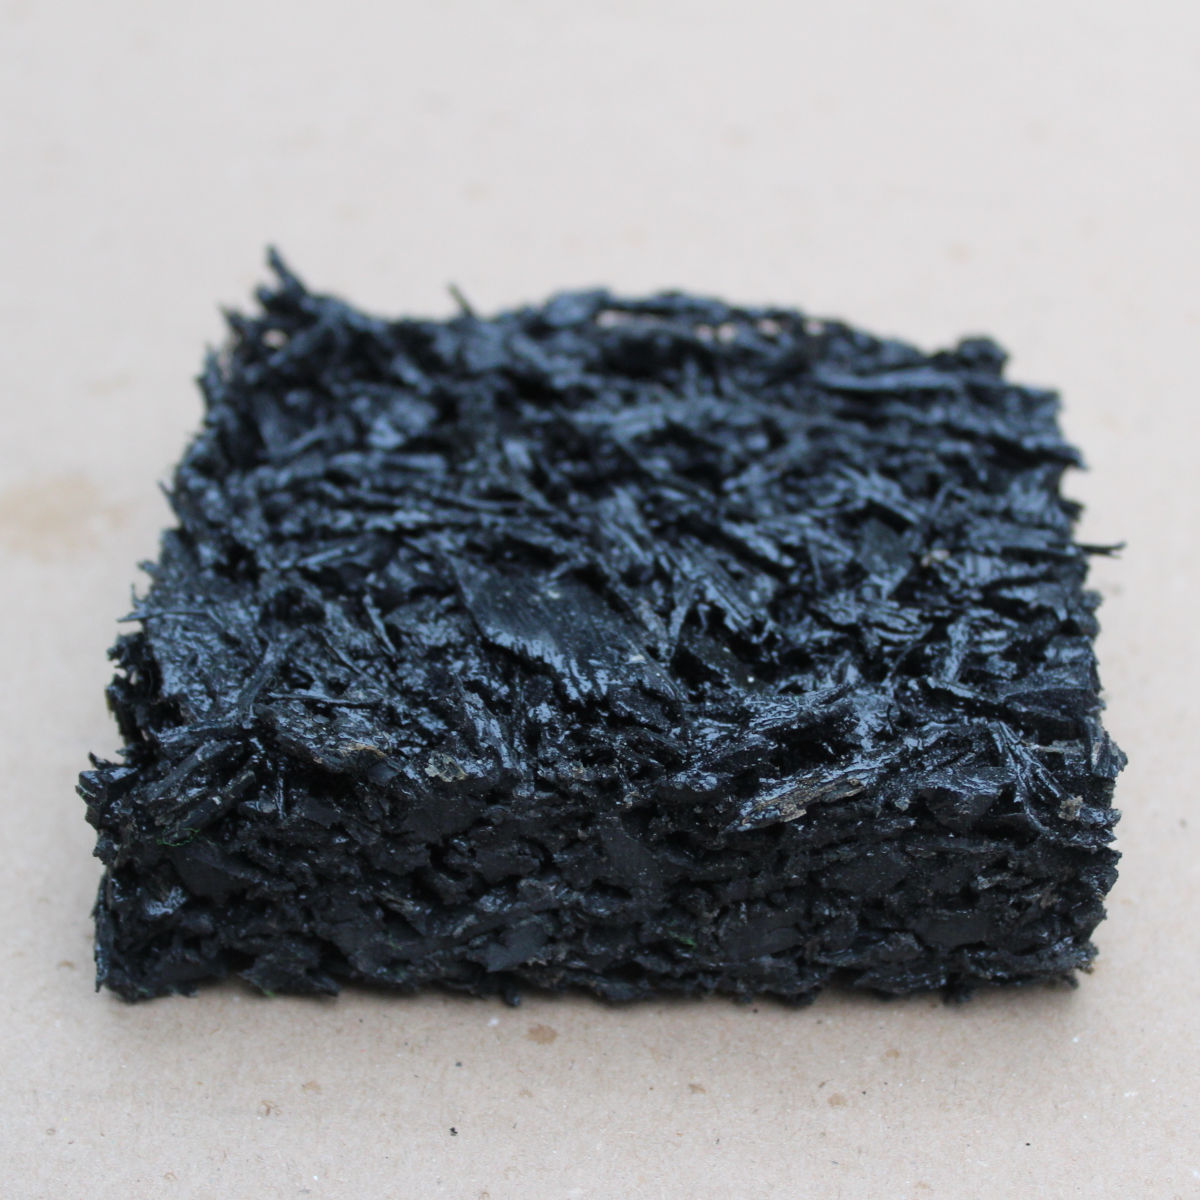 Tough Resin Coated Black Rubber Mulch 20kg (not coloured)